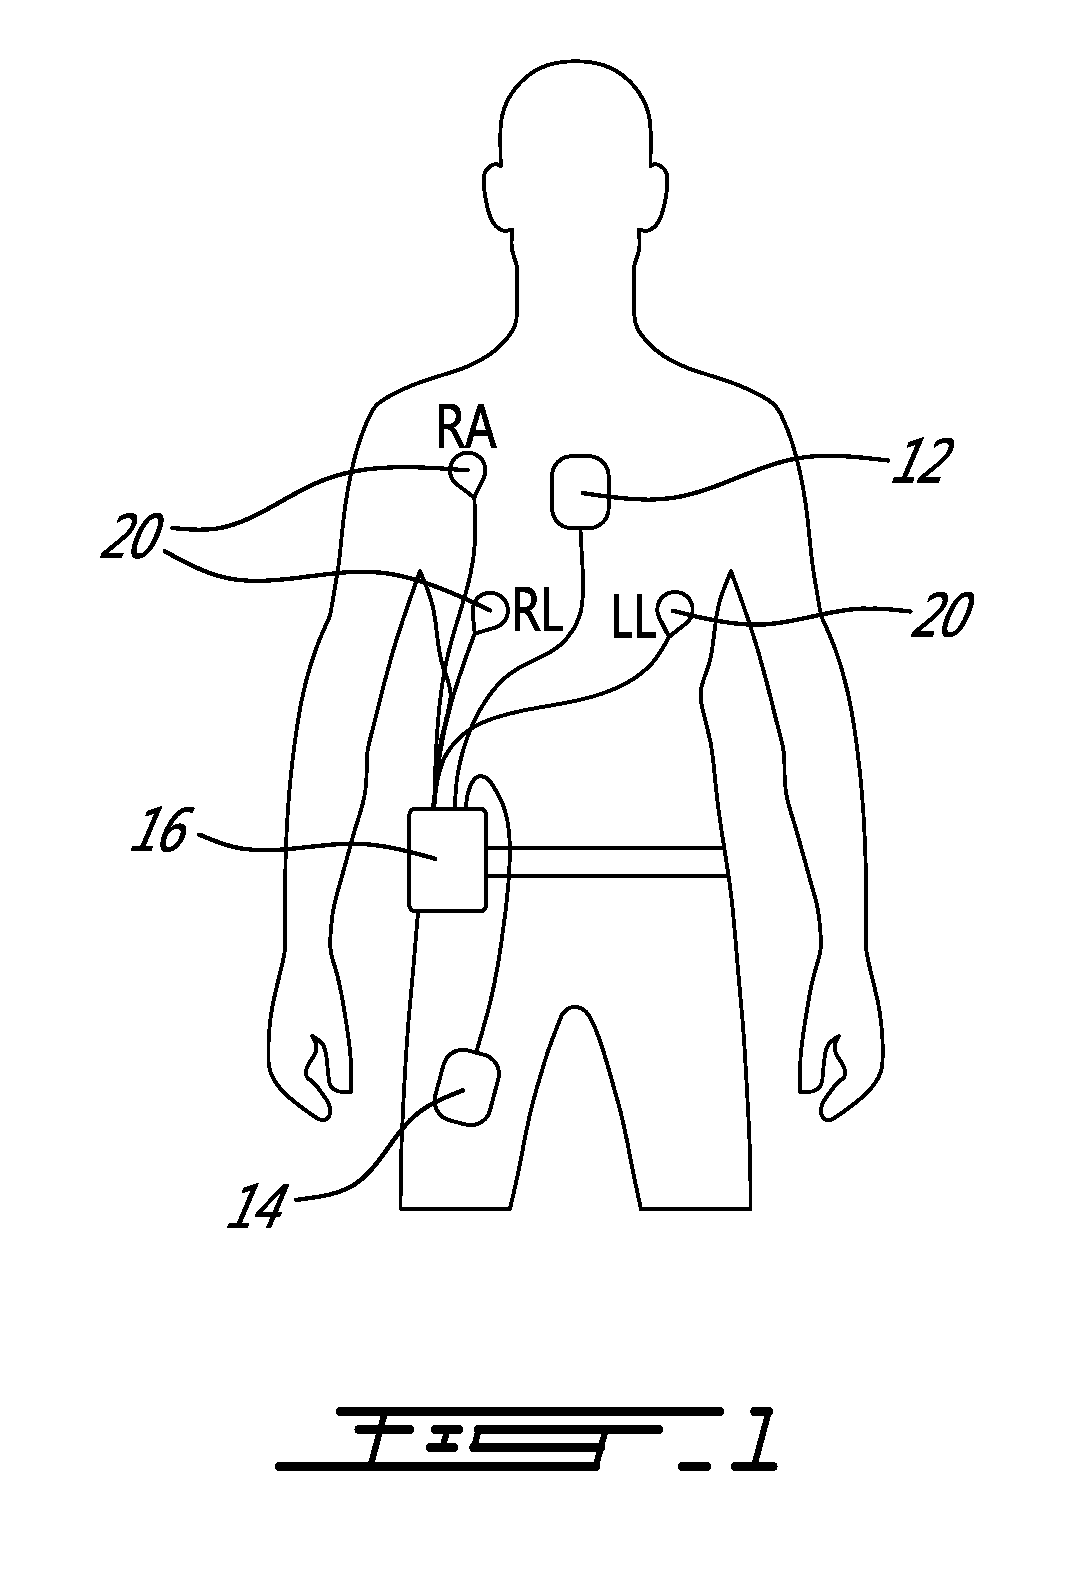 Activity, posture and heart monitoring system and method